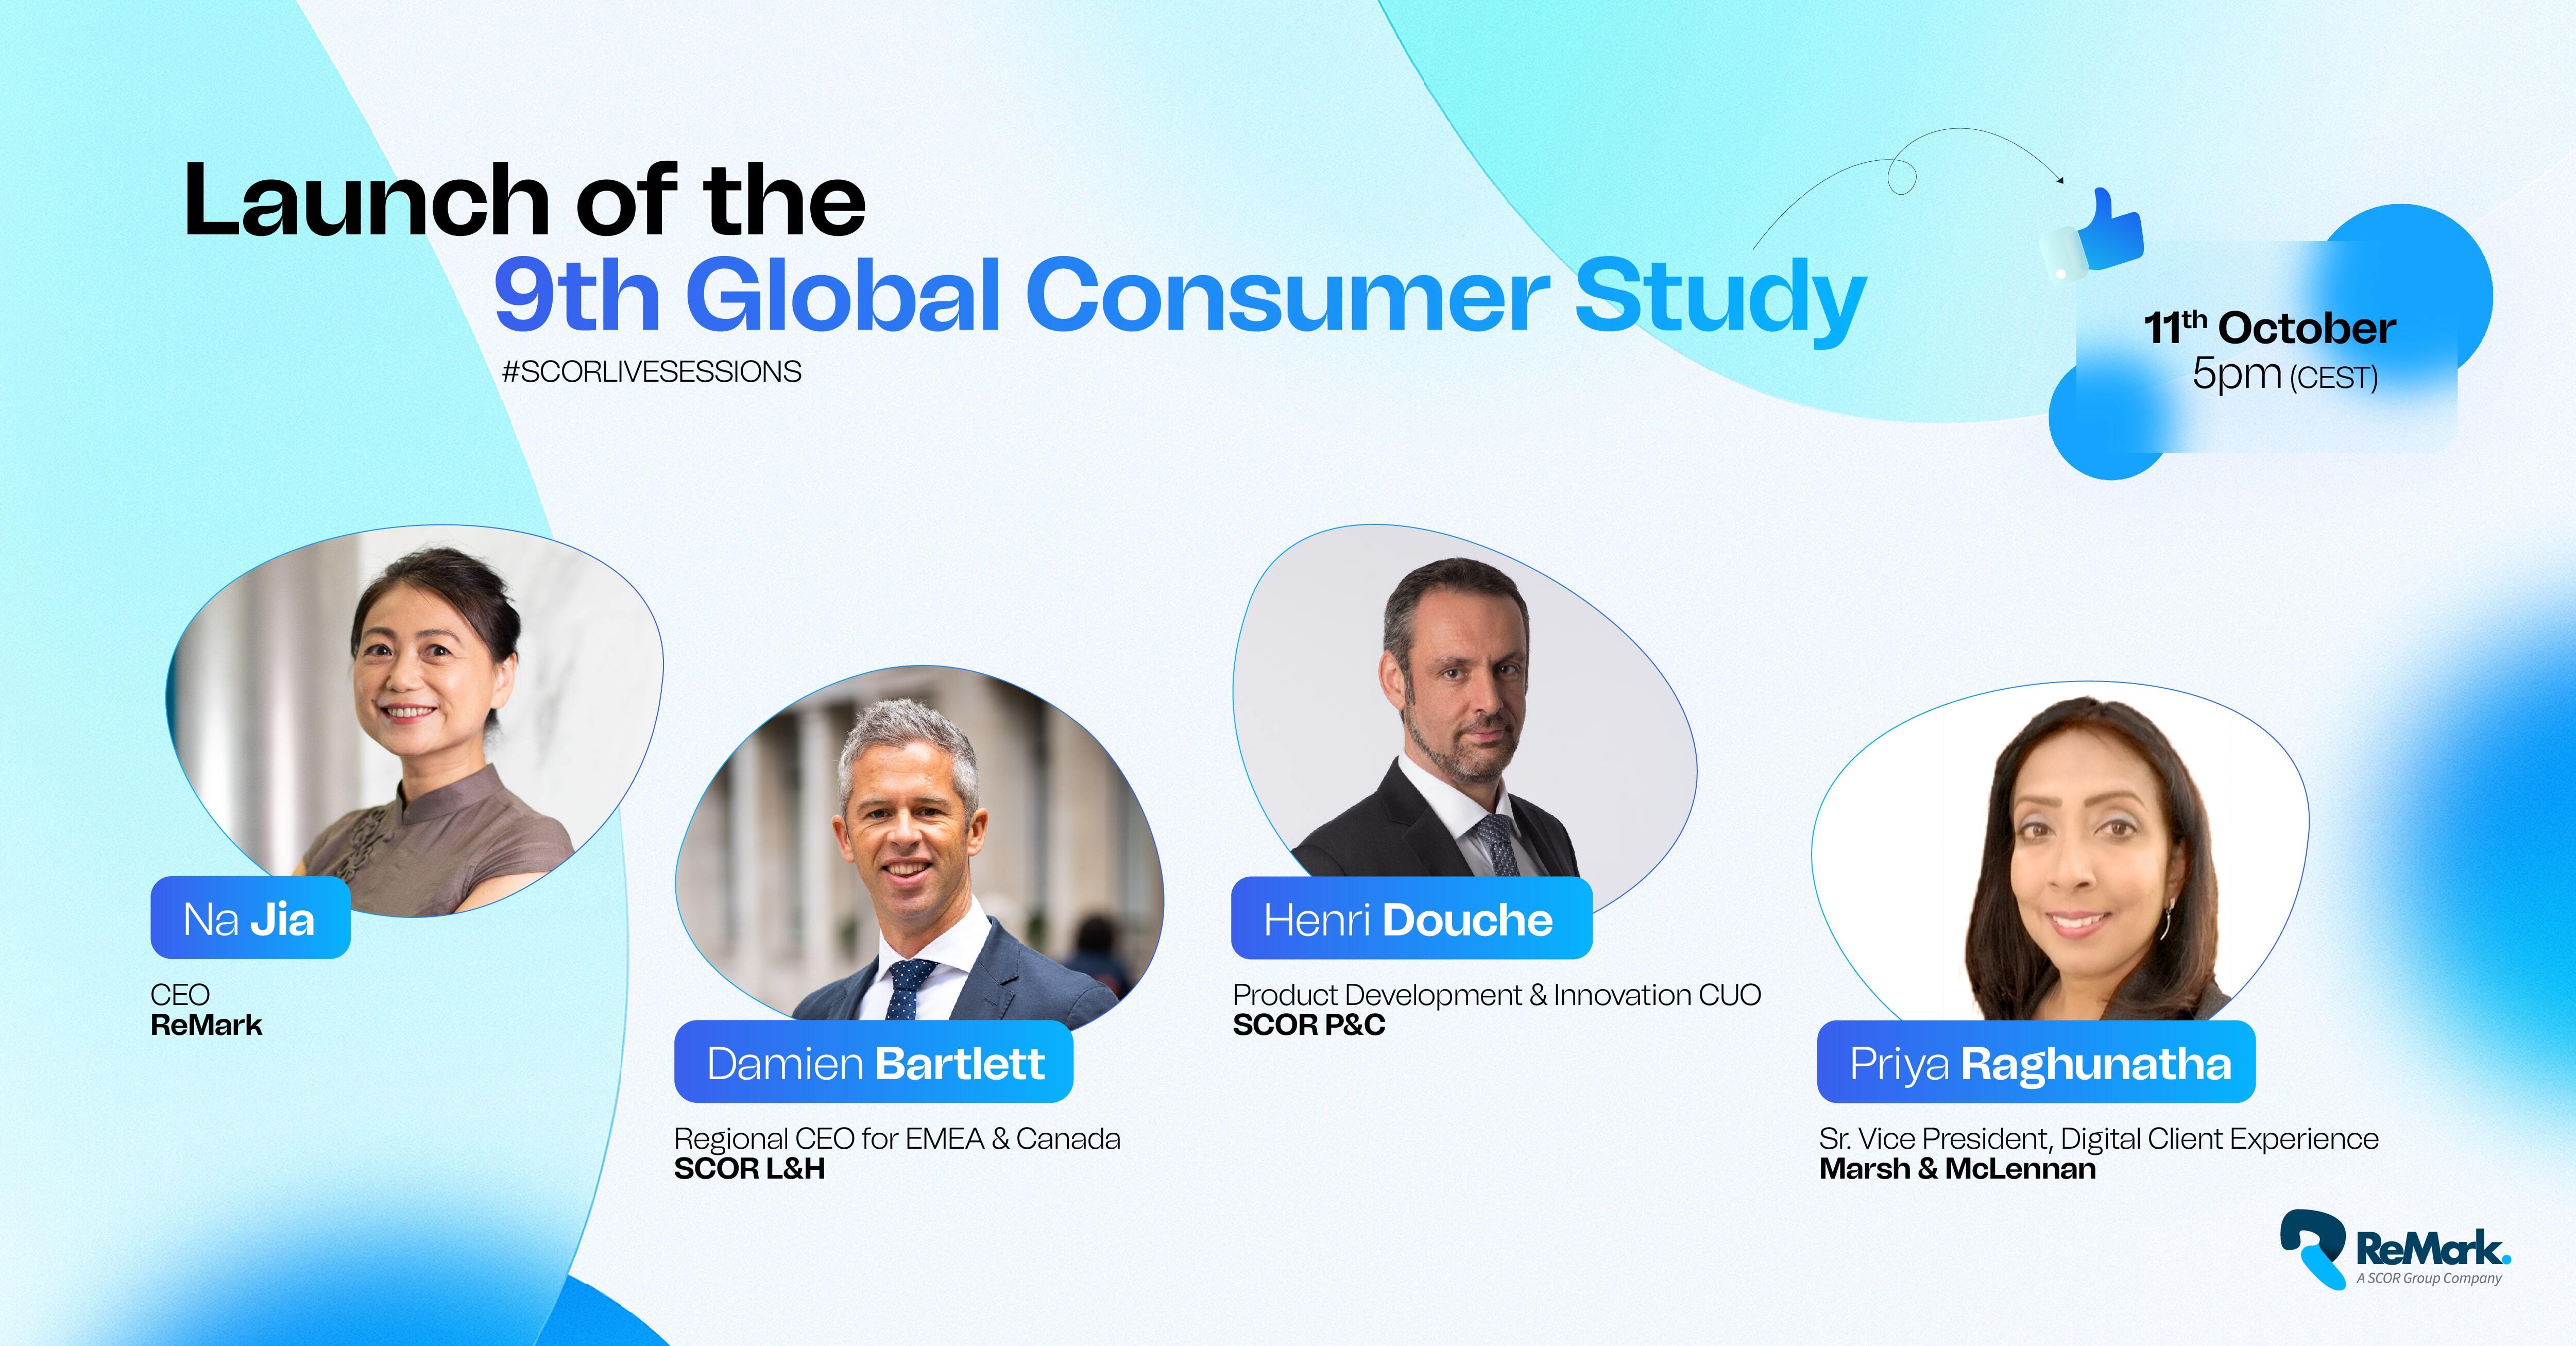 Launch of the 9th Global Consumer Study